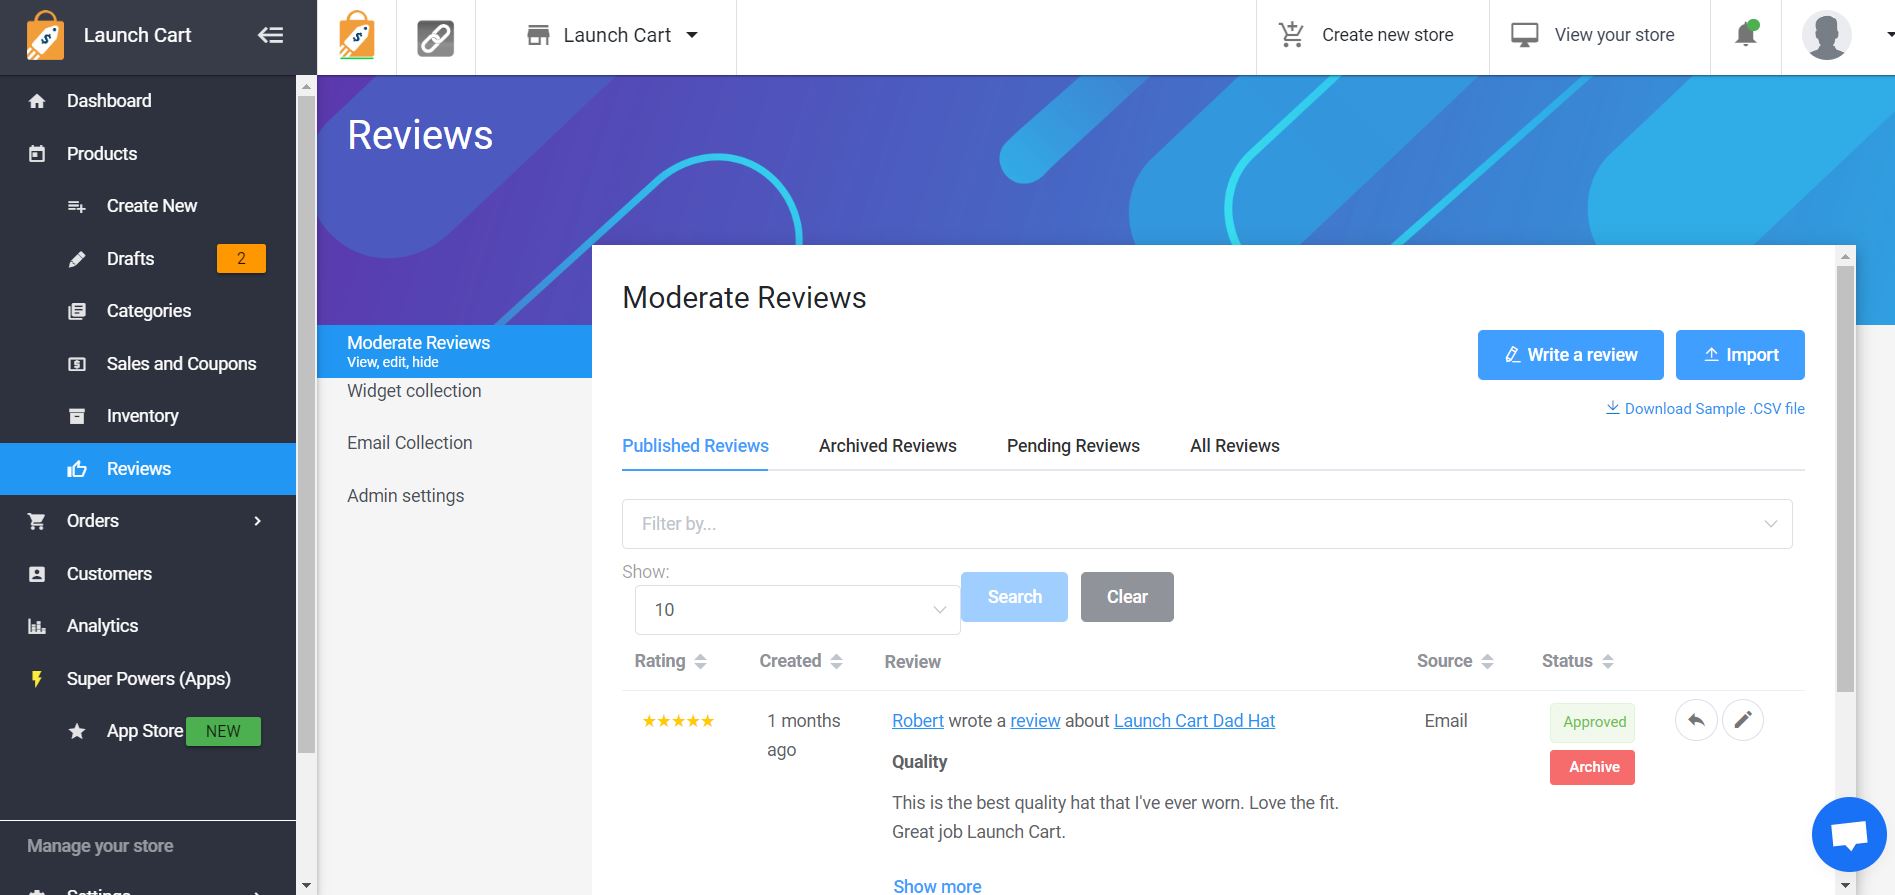 Manage all your reviews with the native review management tool built into Launch Cart.